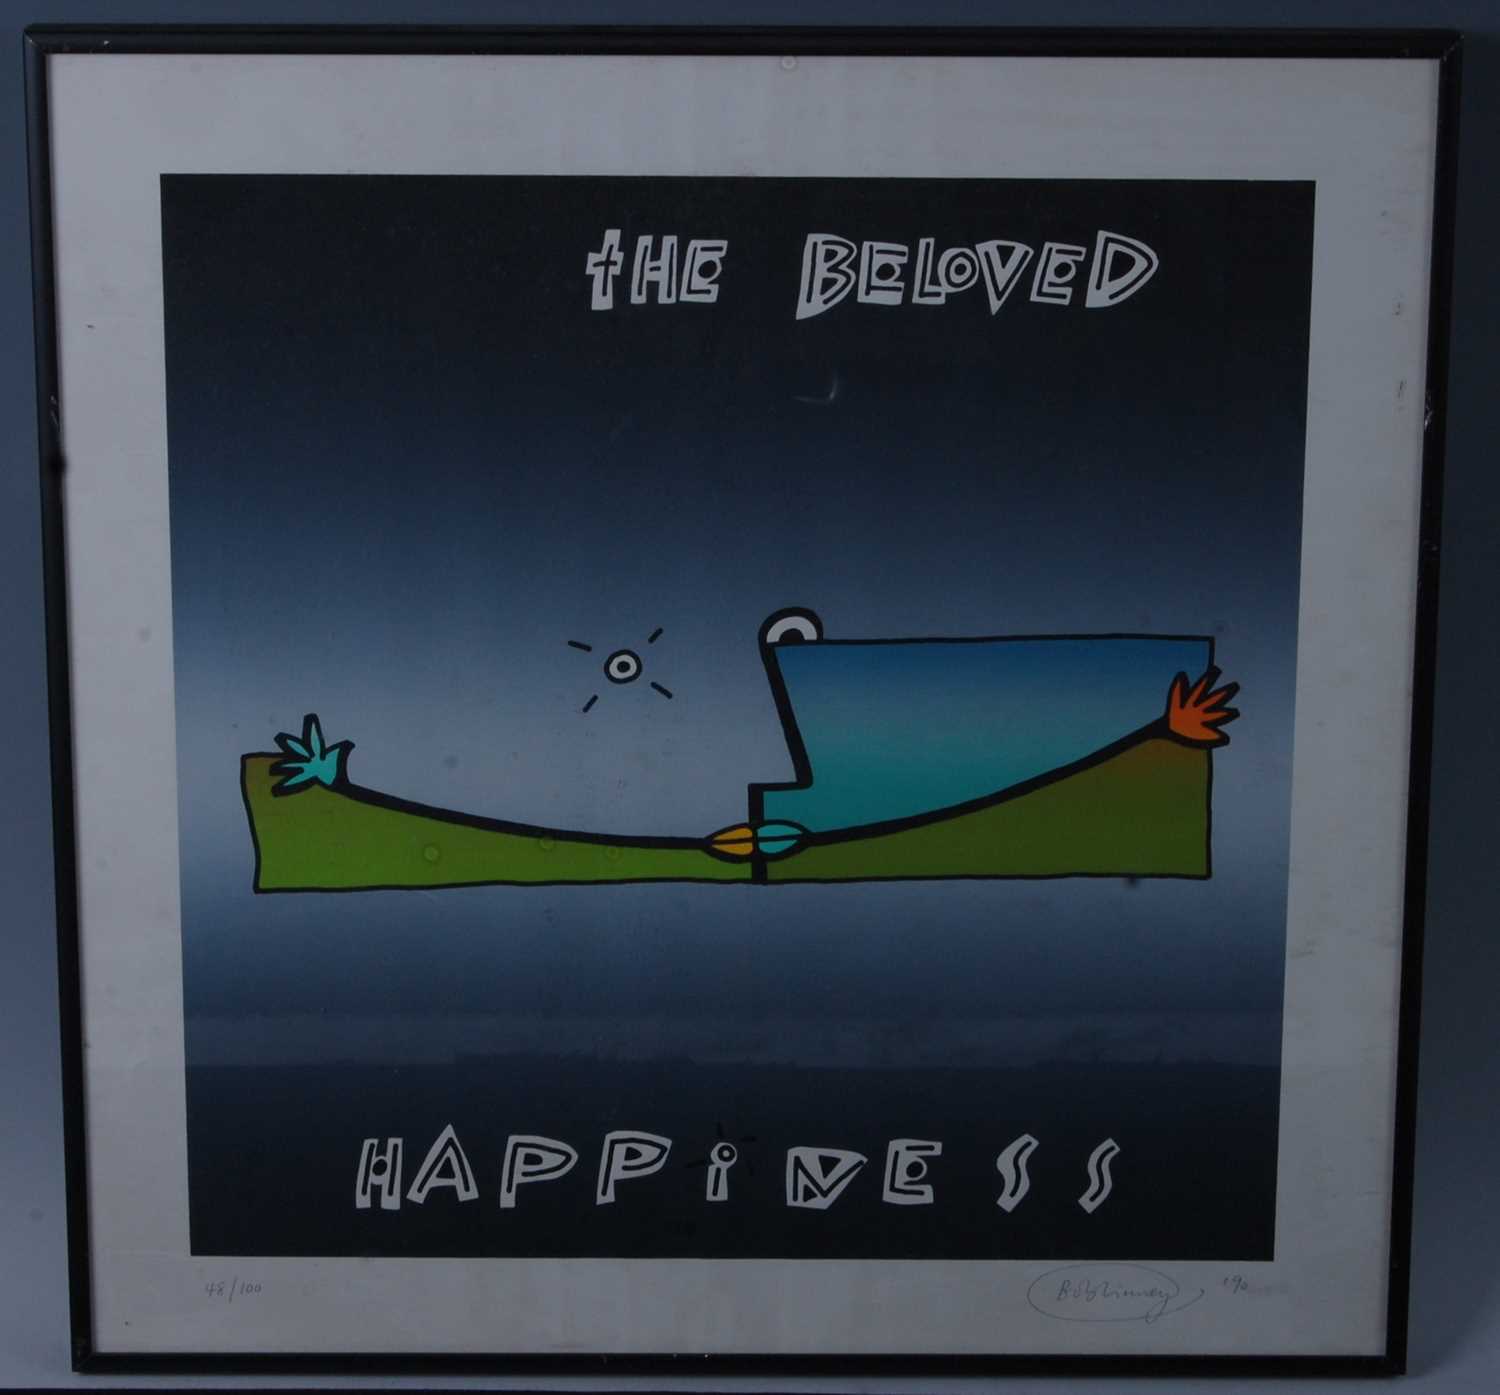 Lot 514 - The Beloved - Happiness, a promotional...